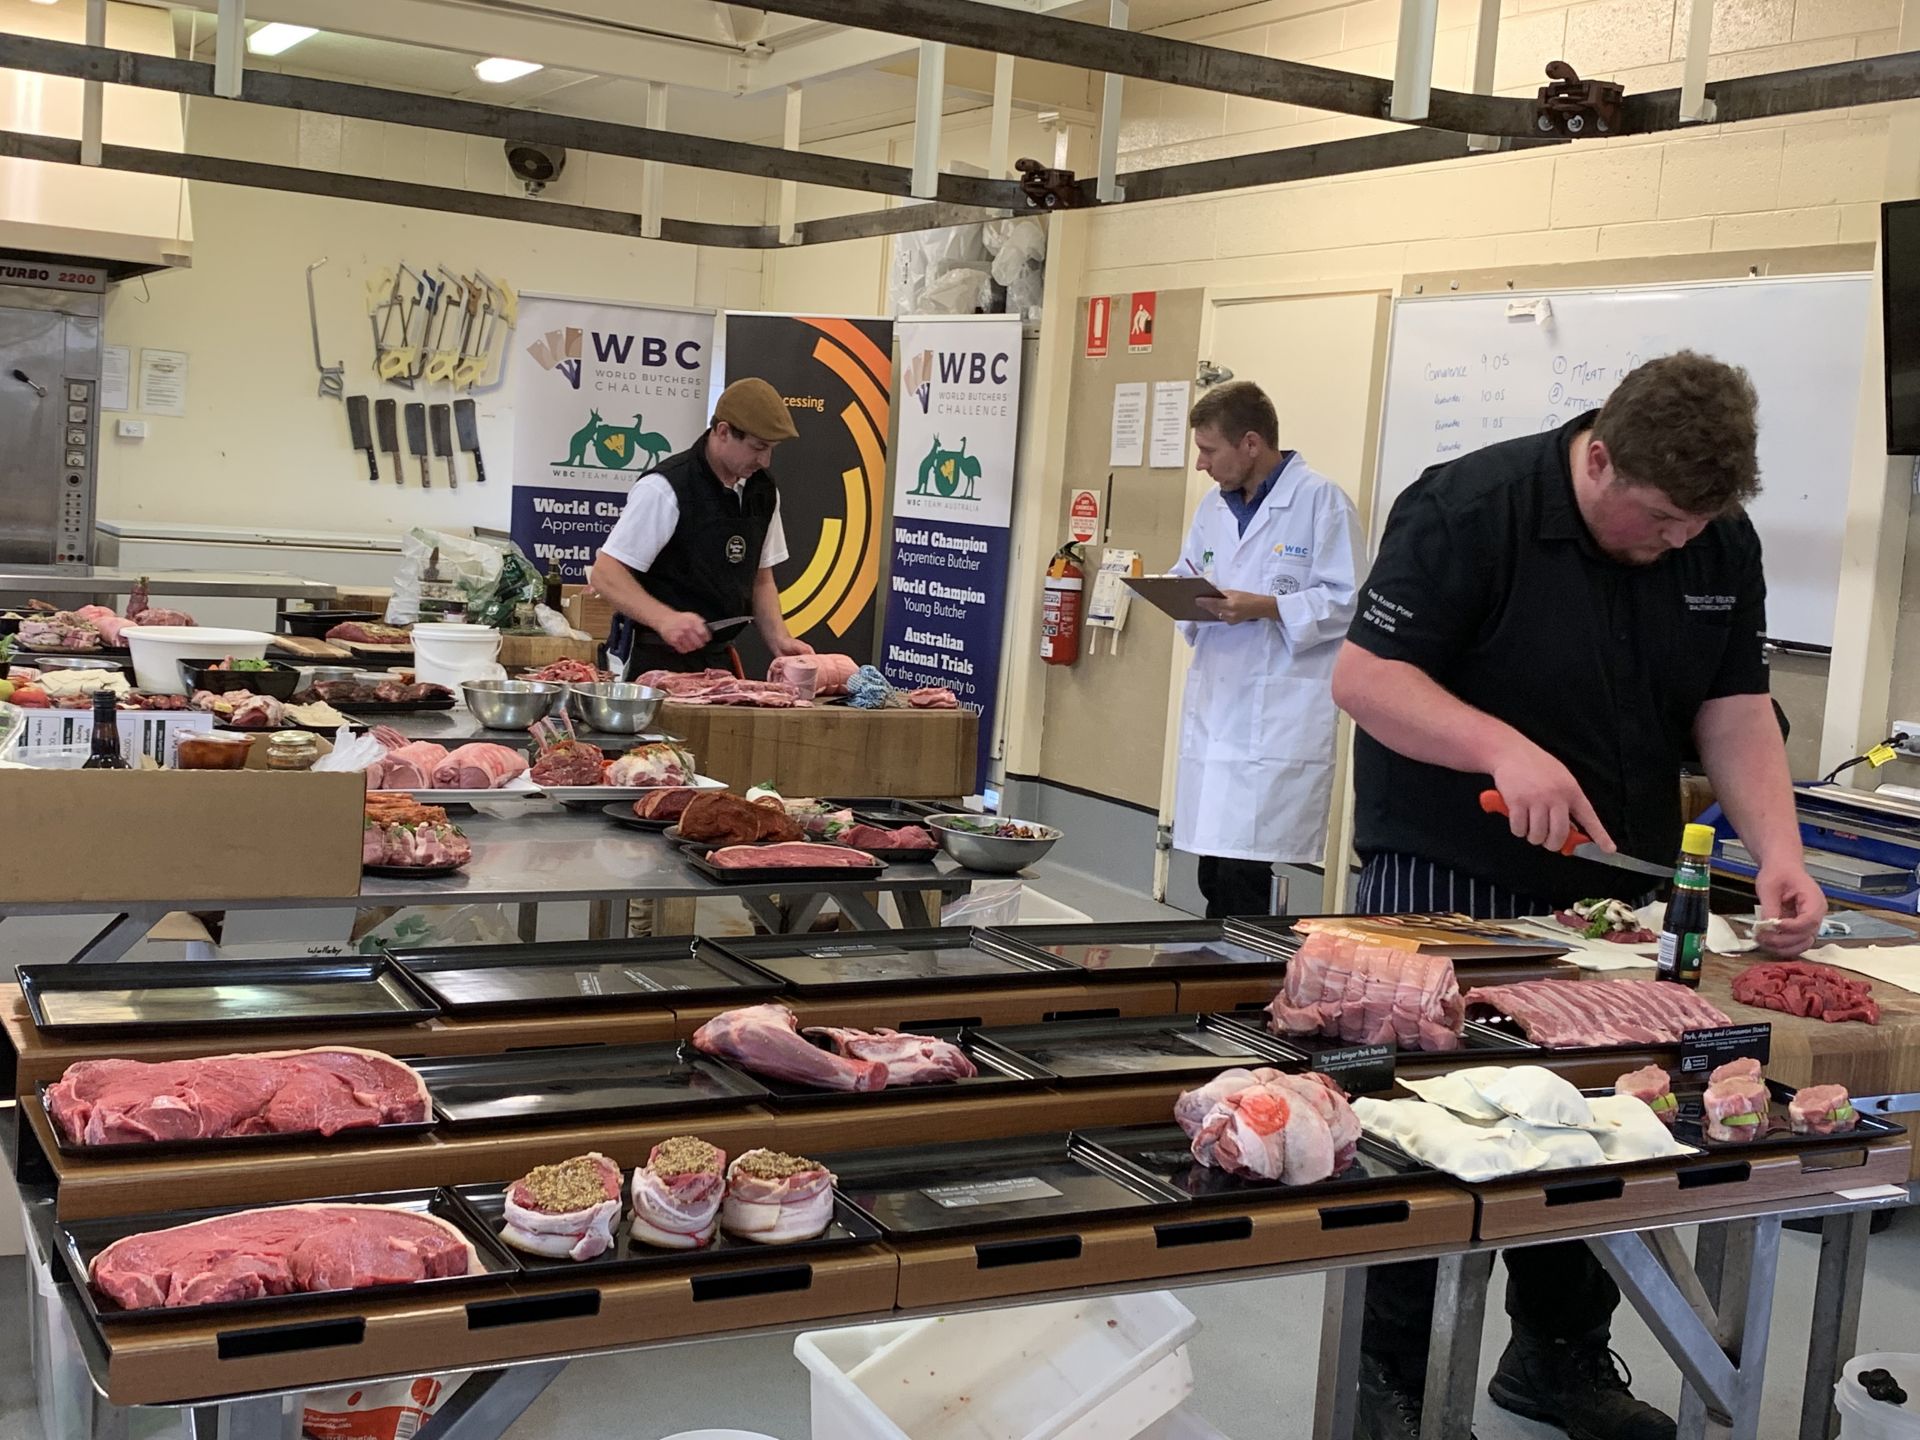 Students practicing their butchery skills at the Glenorchy training center